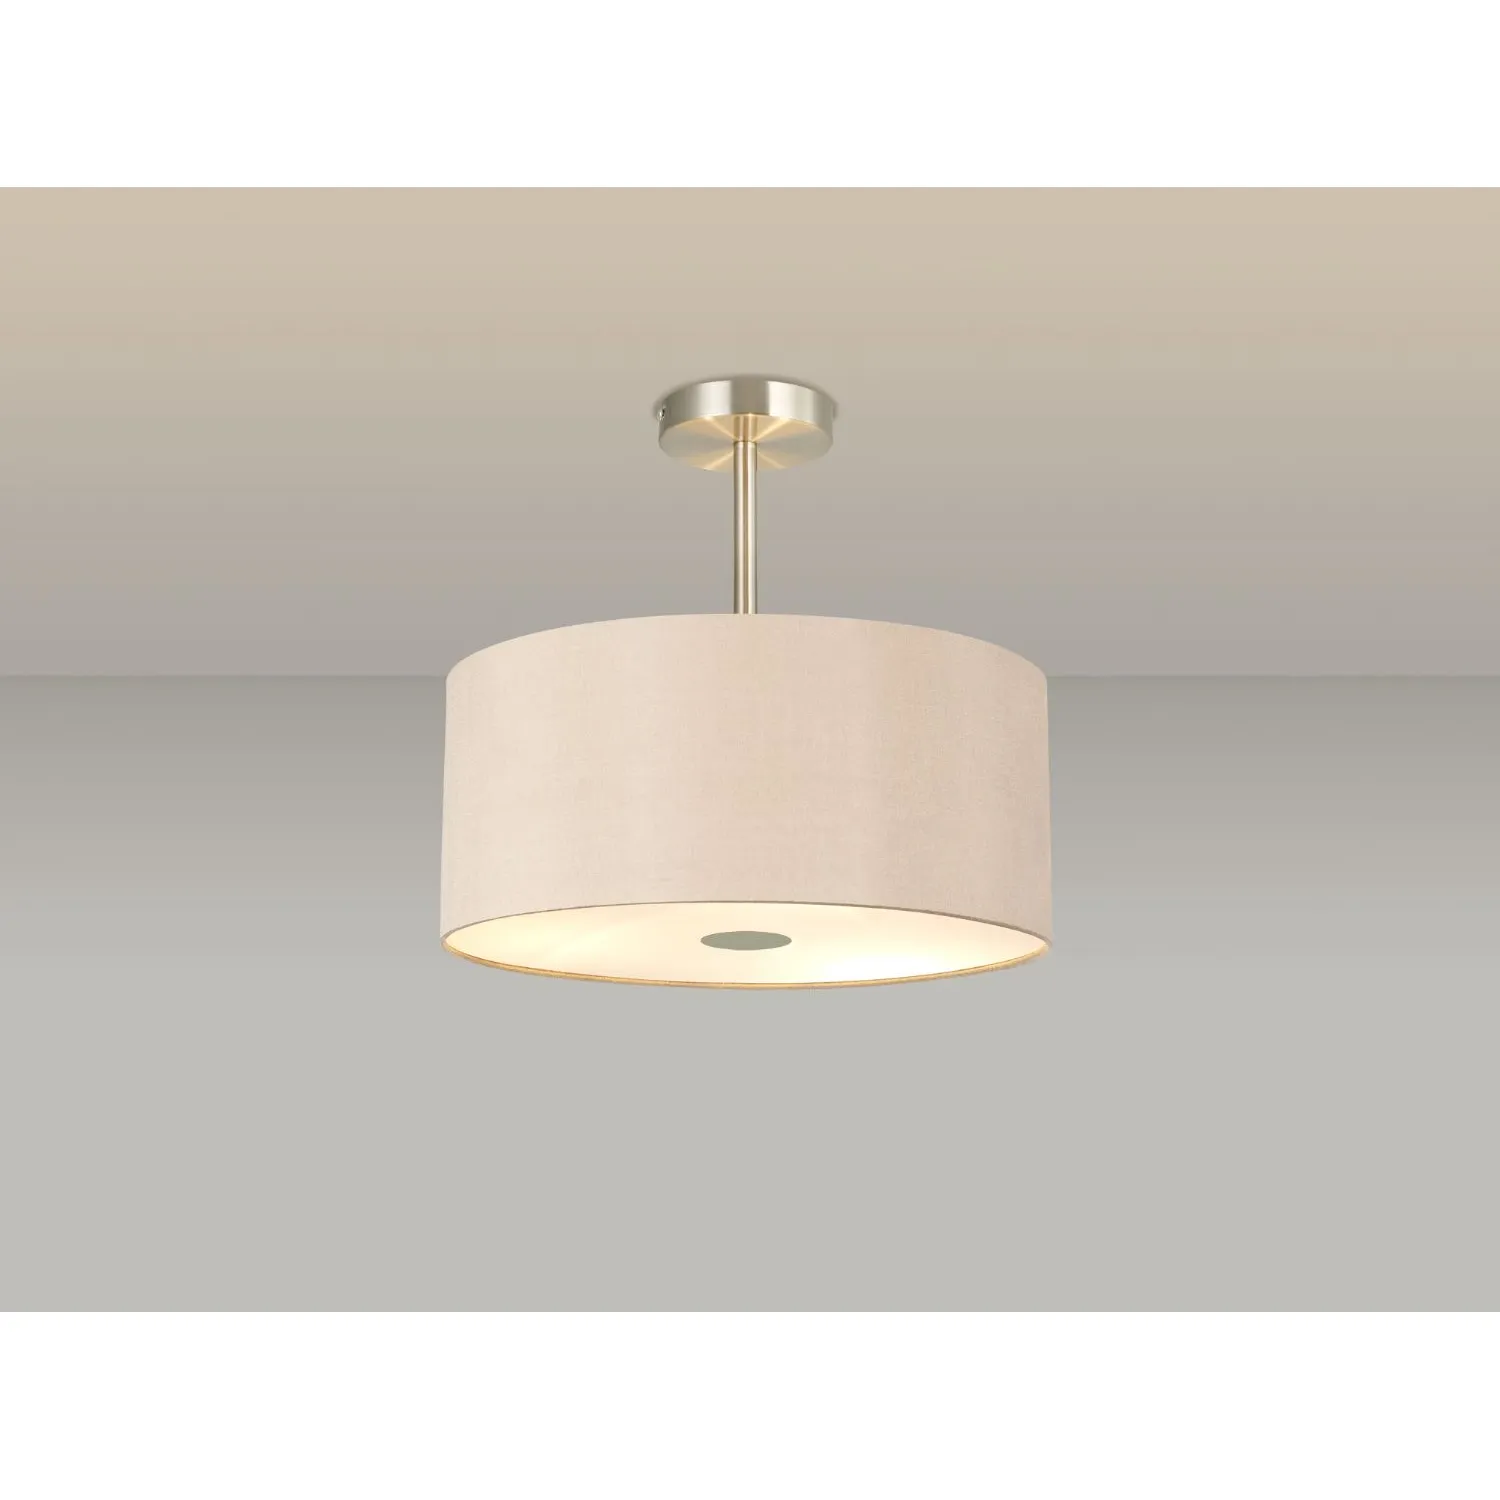 Baymont Satin Nickel 5 Light E27 Semi Flush c w 400mm Dual Faux Silk Shade, Antique Gold Ruby And 400mm Frosted SN Acrylic Diffuser